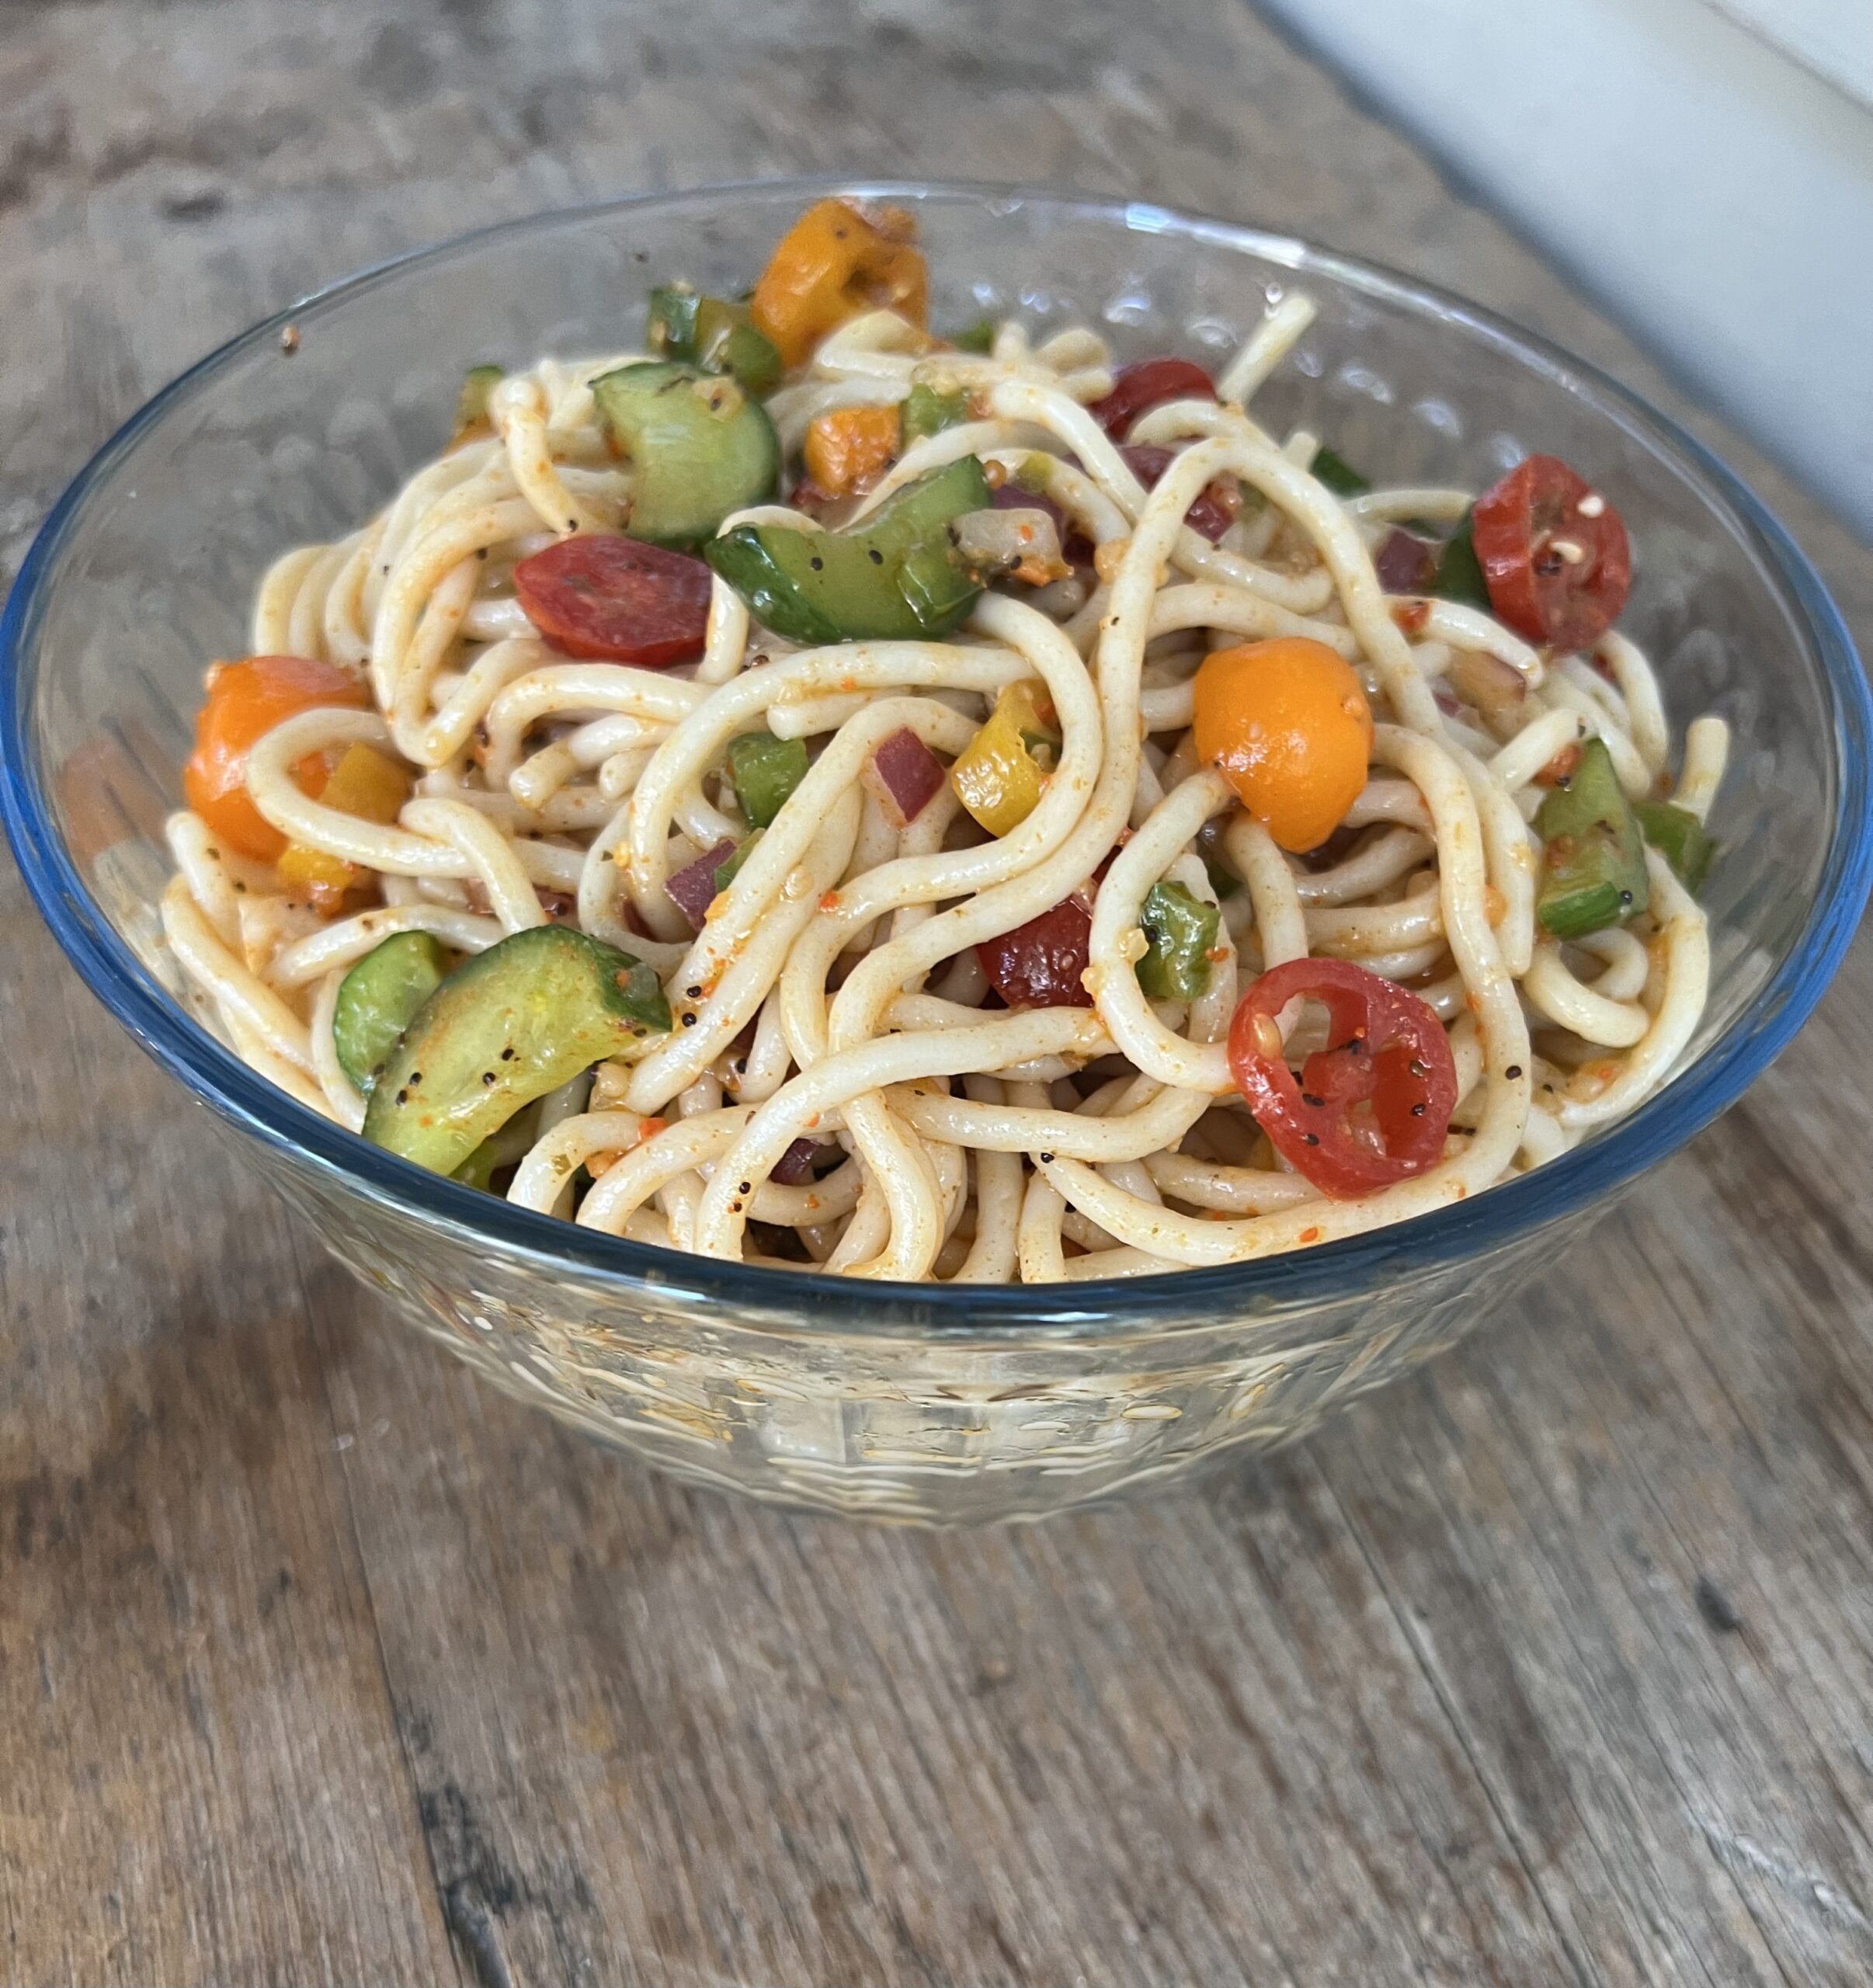 Supreme Pasta Salad - Love to be in the Kitchen